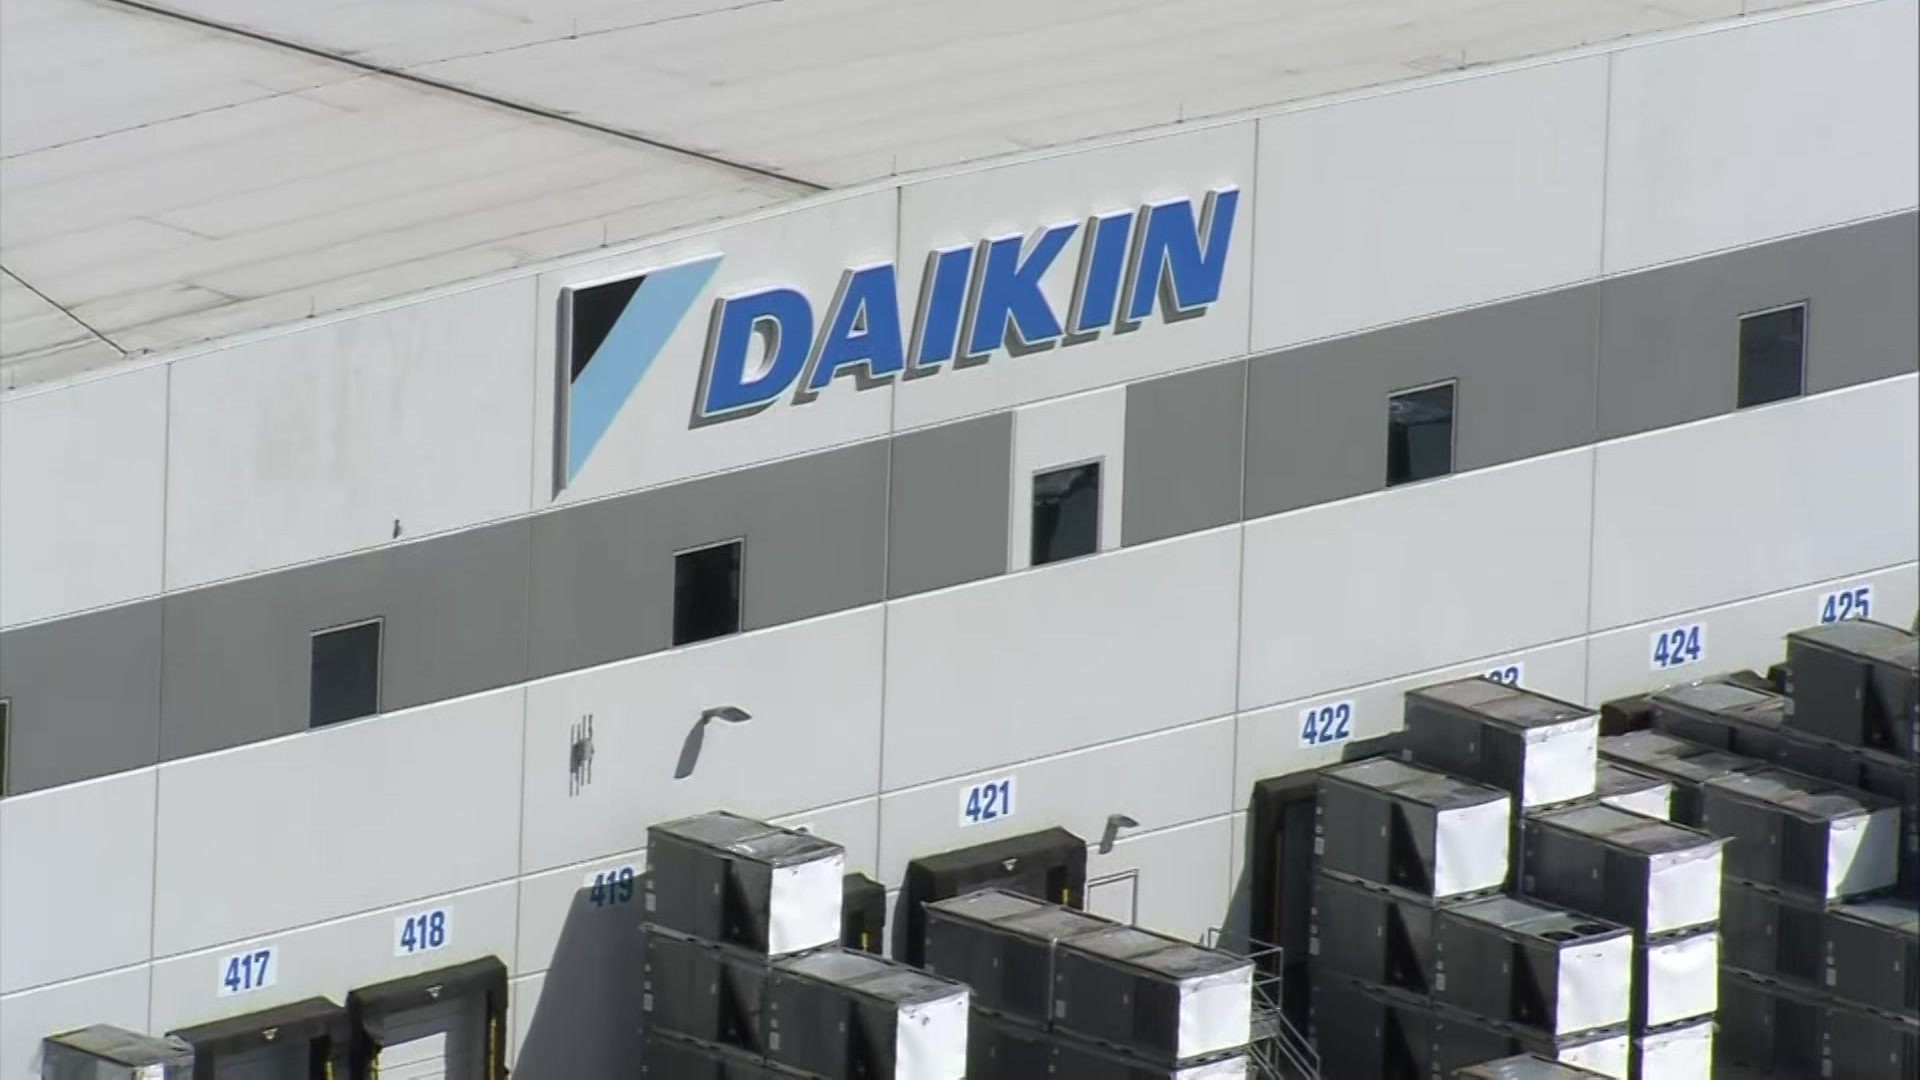 two workers at daikin plant test positive